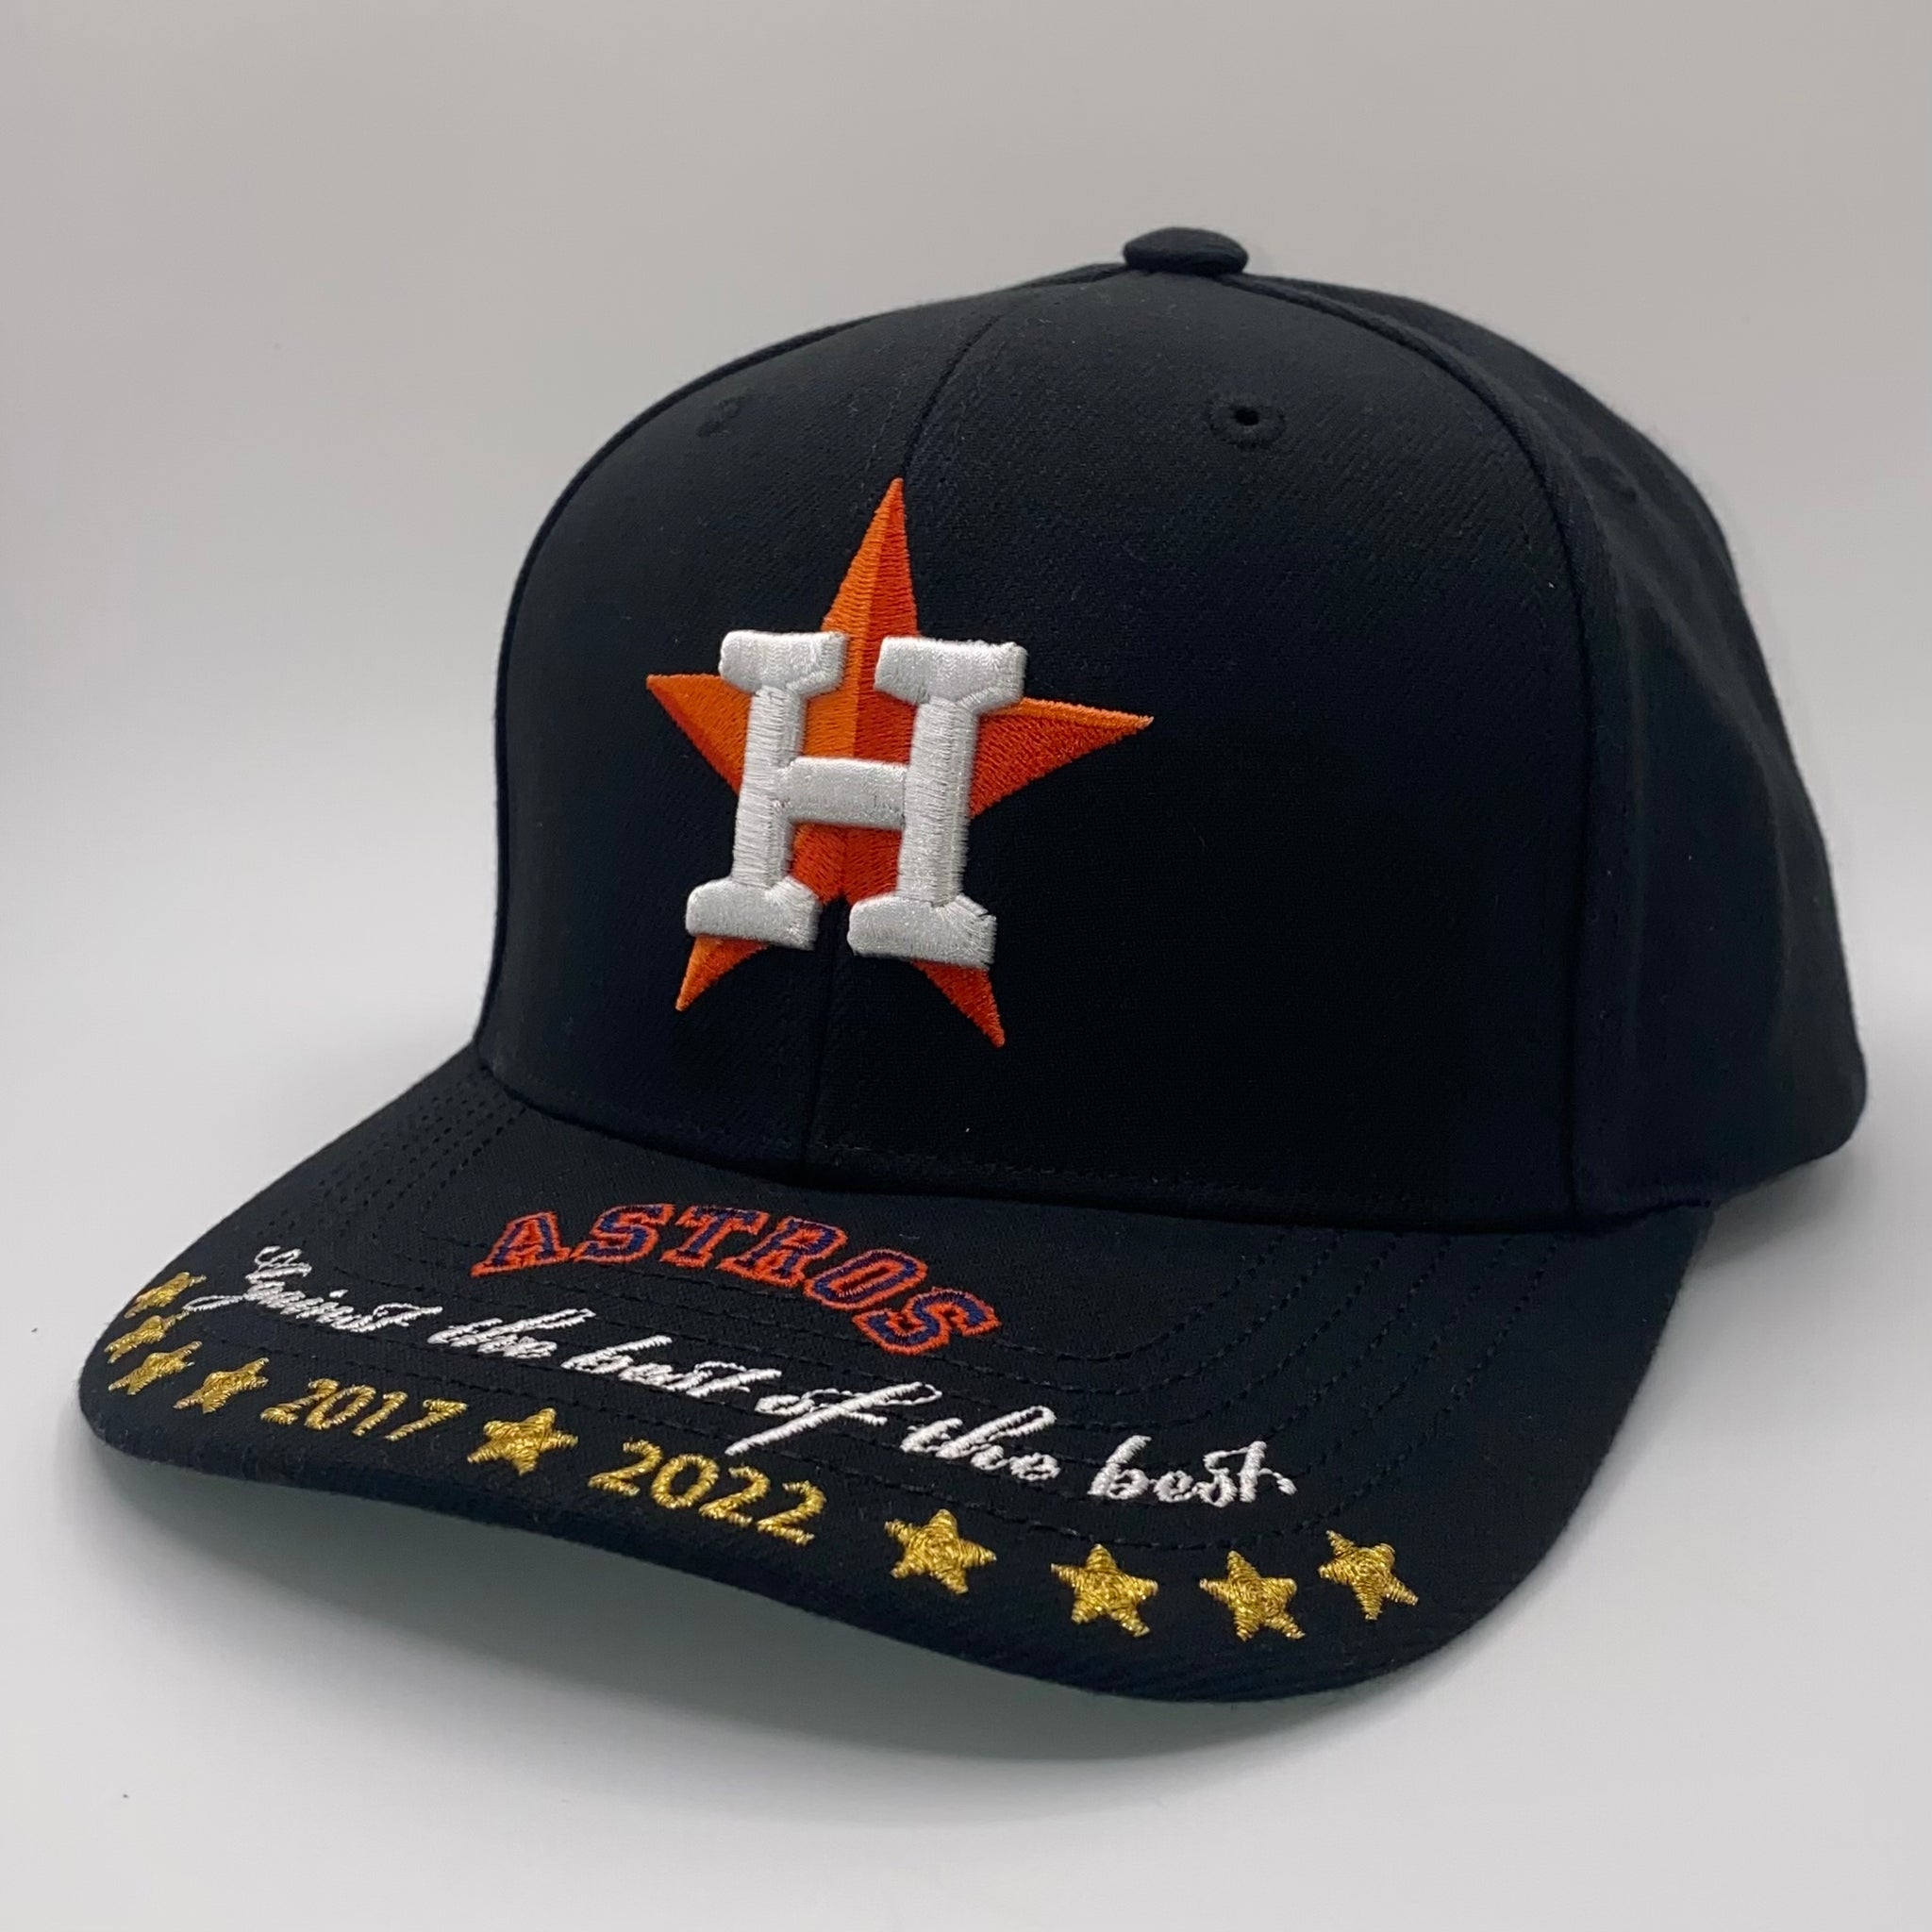 Houston Astros Mitchell & Ness "Against the Best of the Best" Snapback Hat